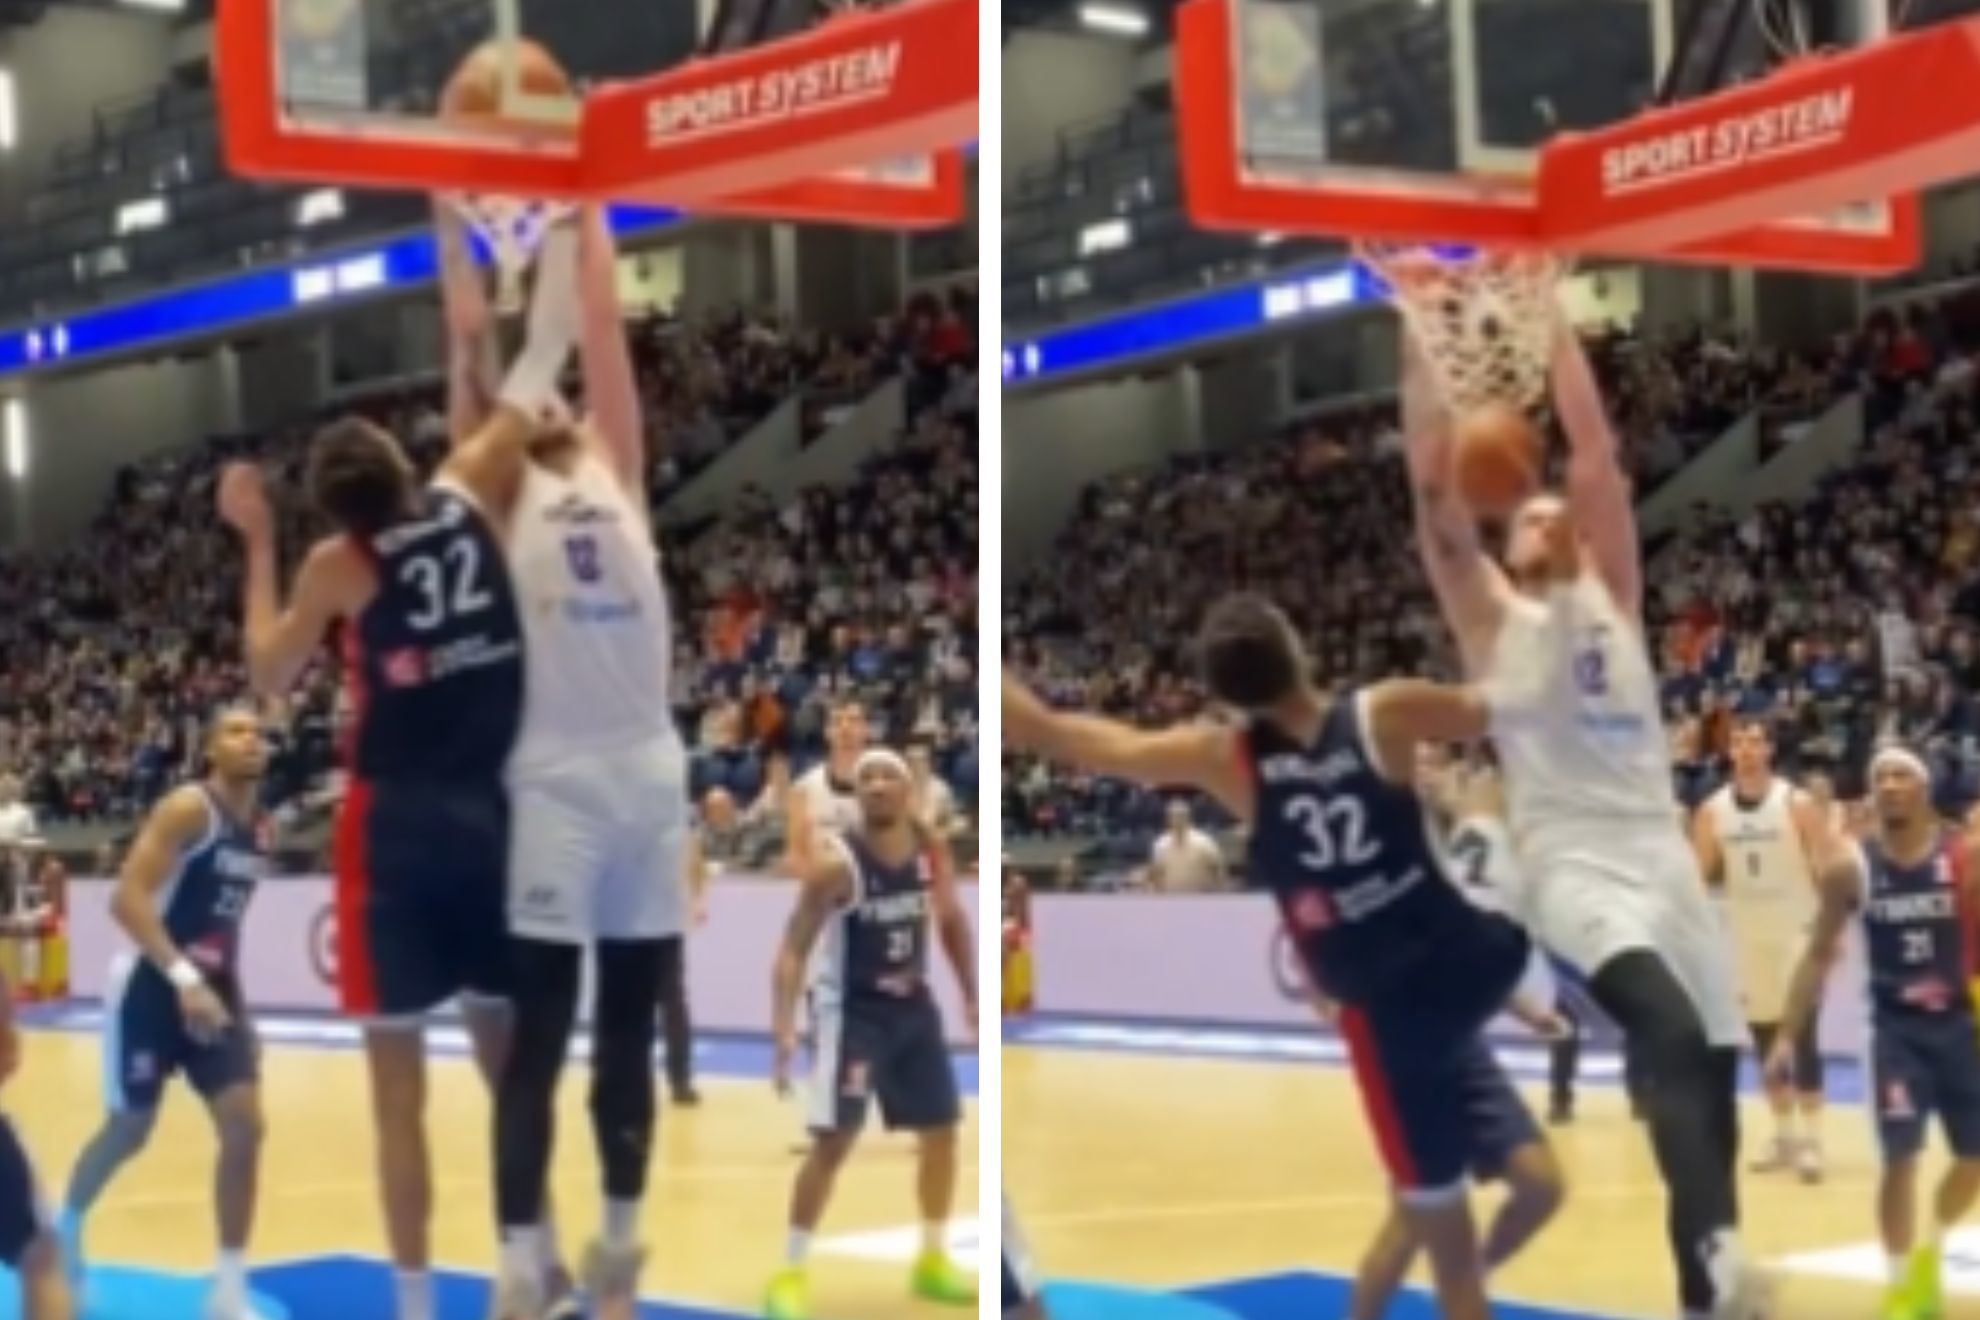 No. 1 NBA prospect Wemby gets dunked on